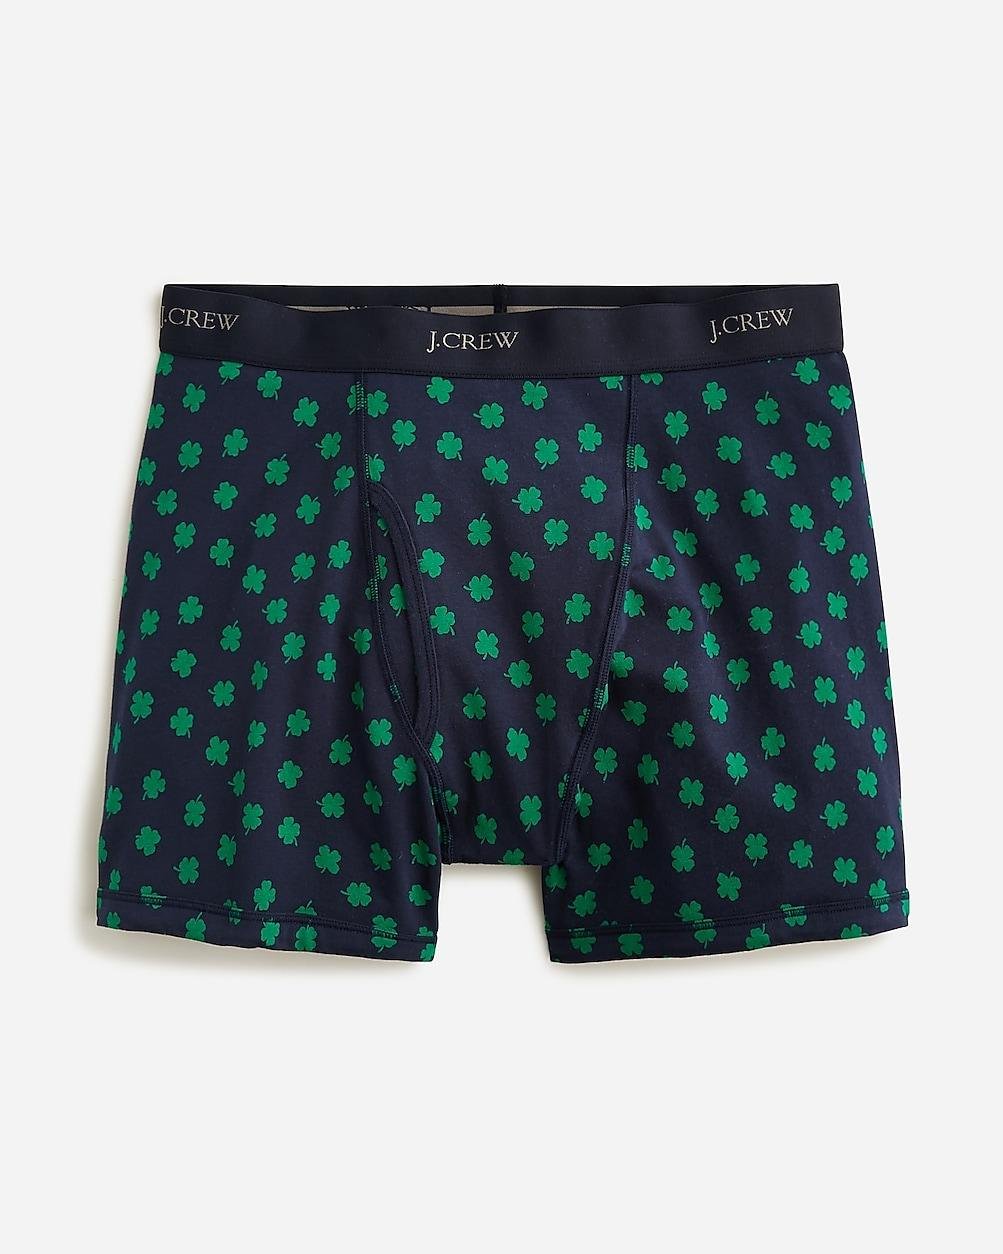 Stretch 4" boxer briefs in print by J.CREW